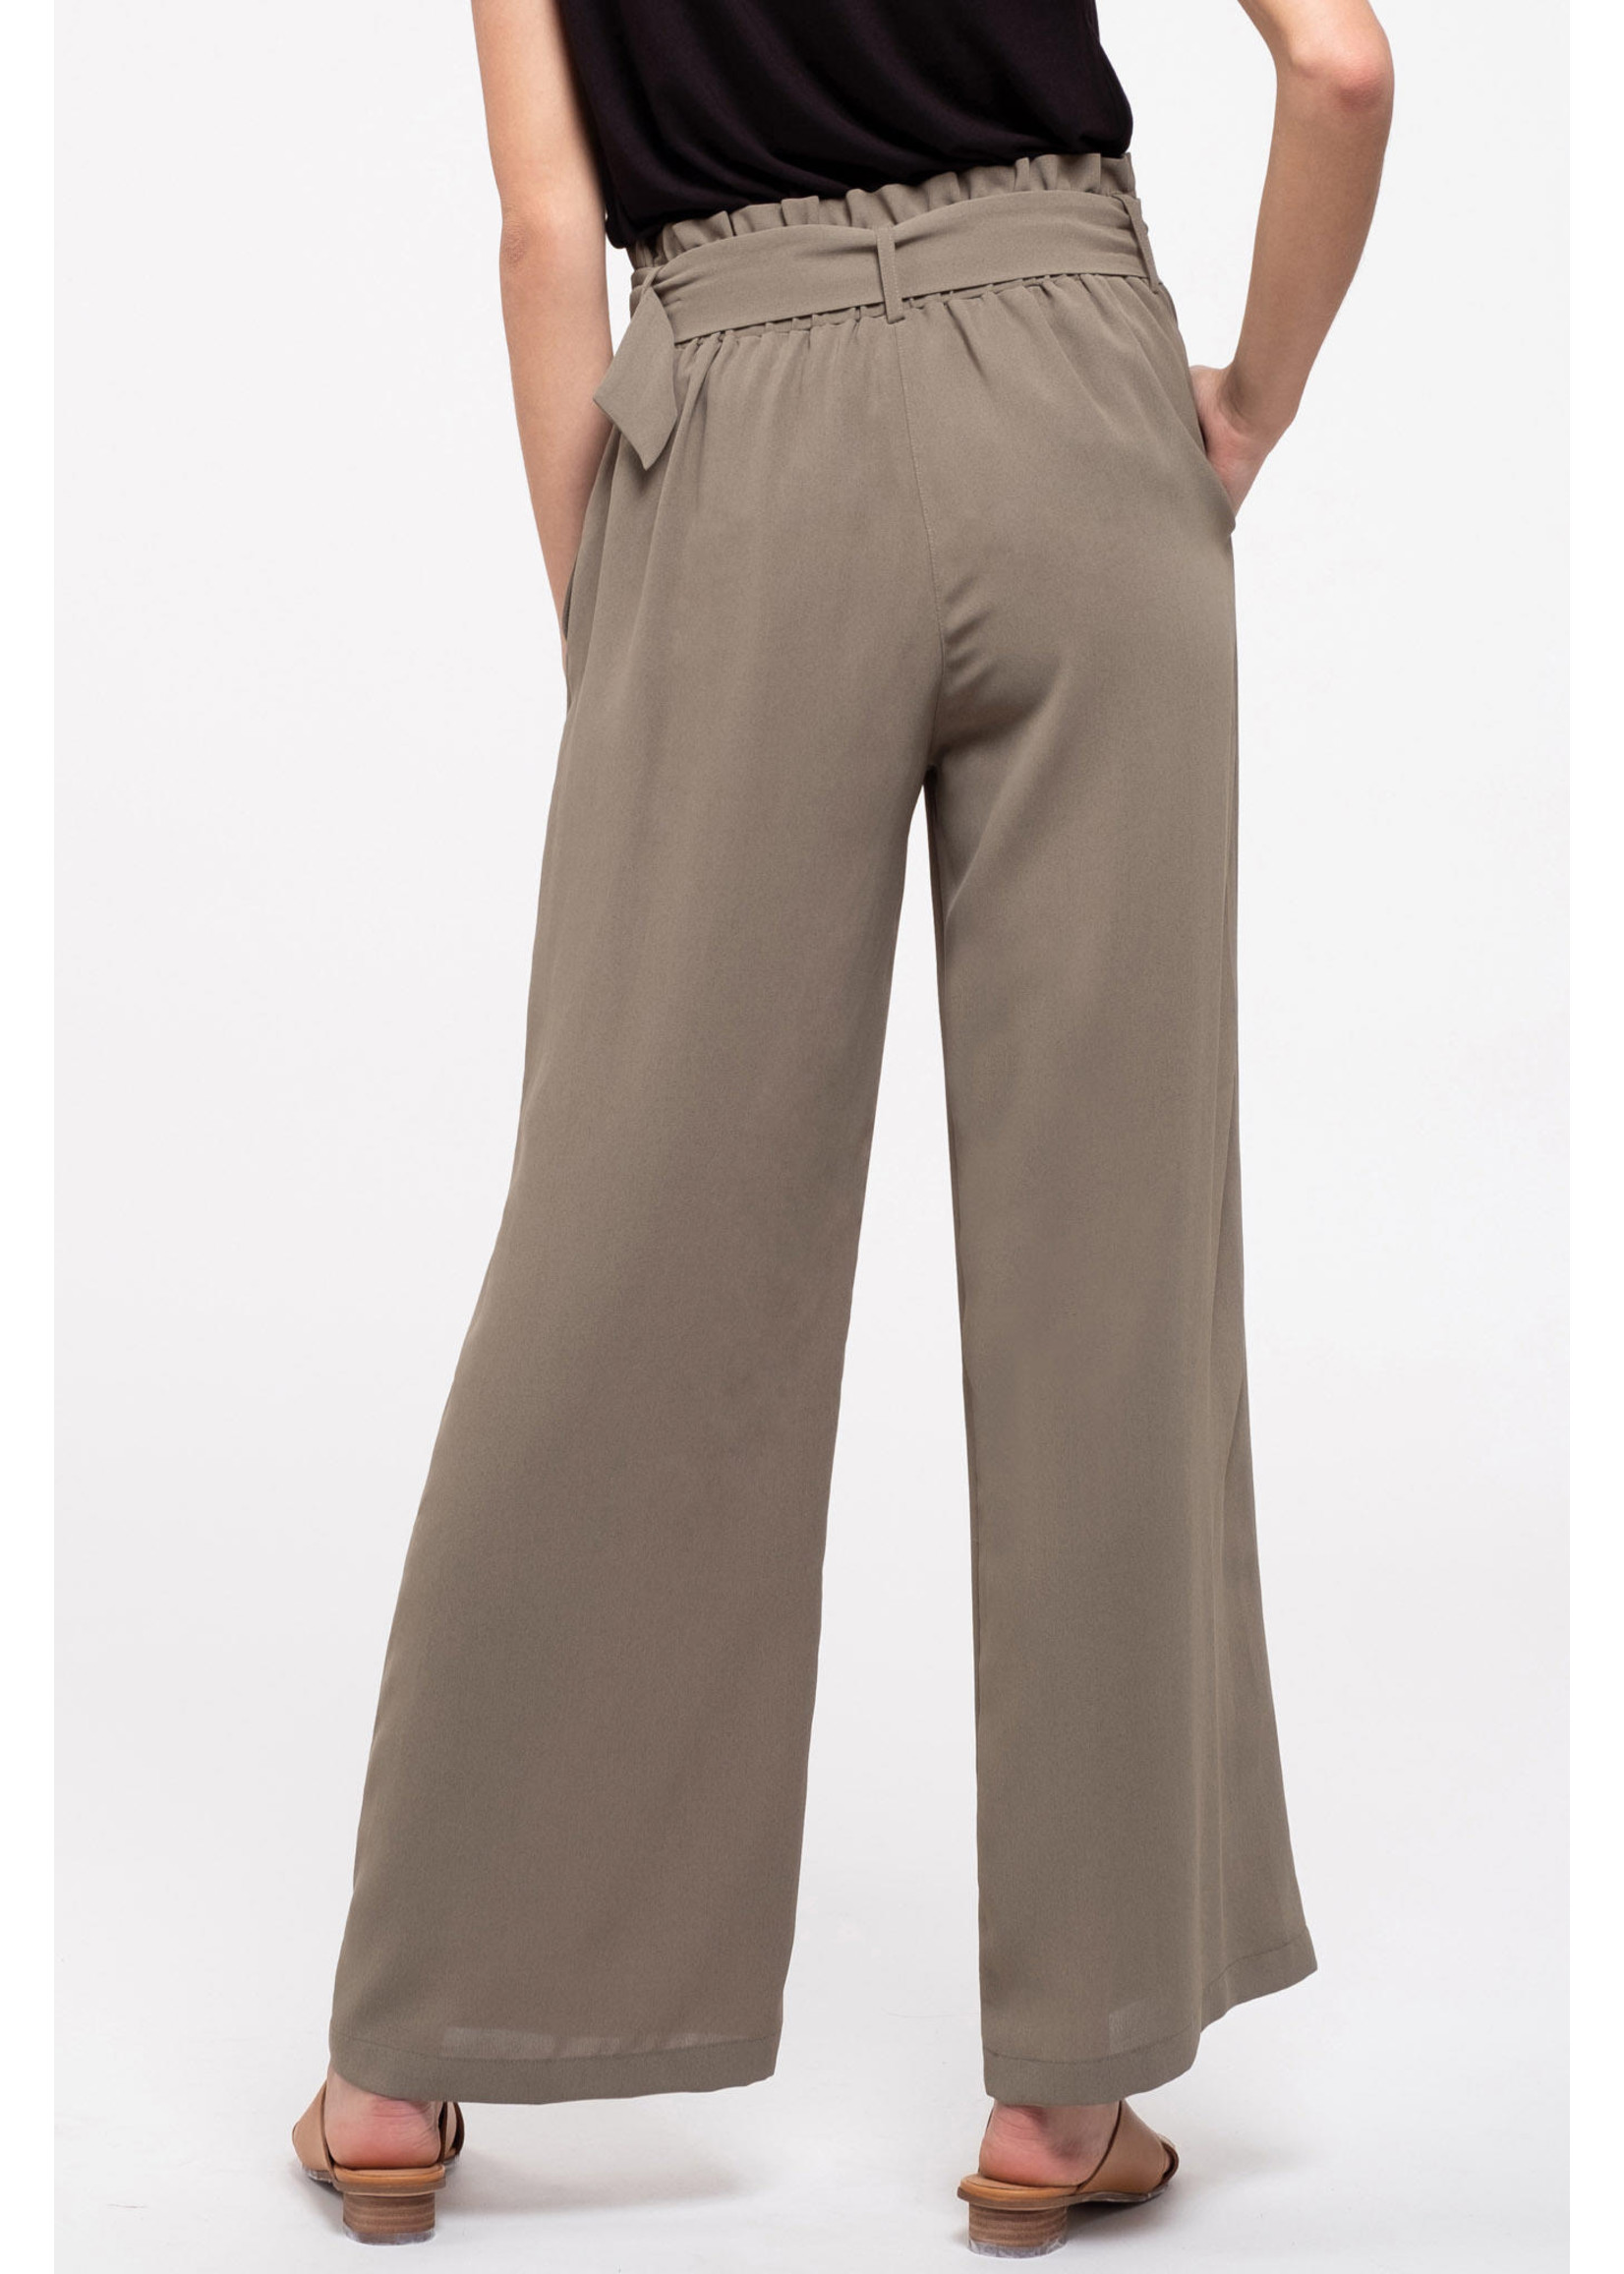 HIGH-RISE BELTED PANTS